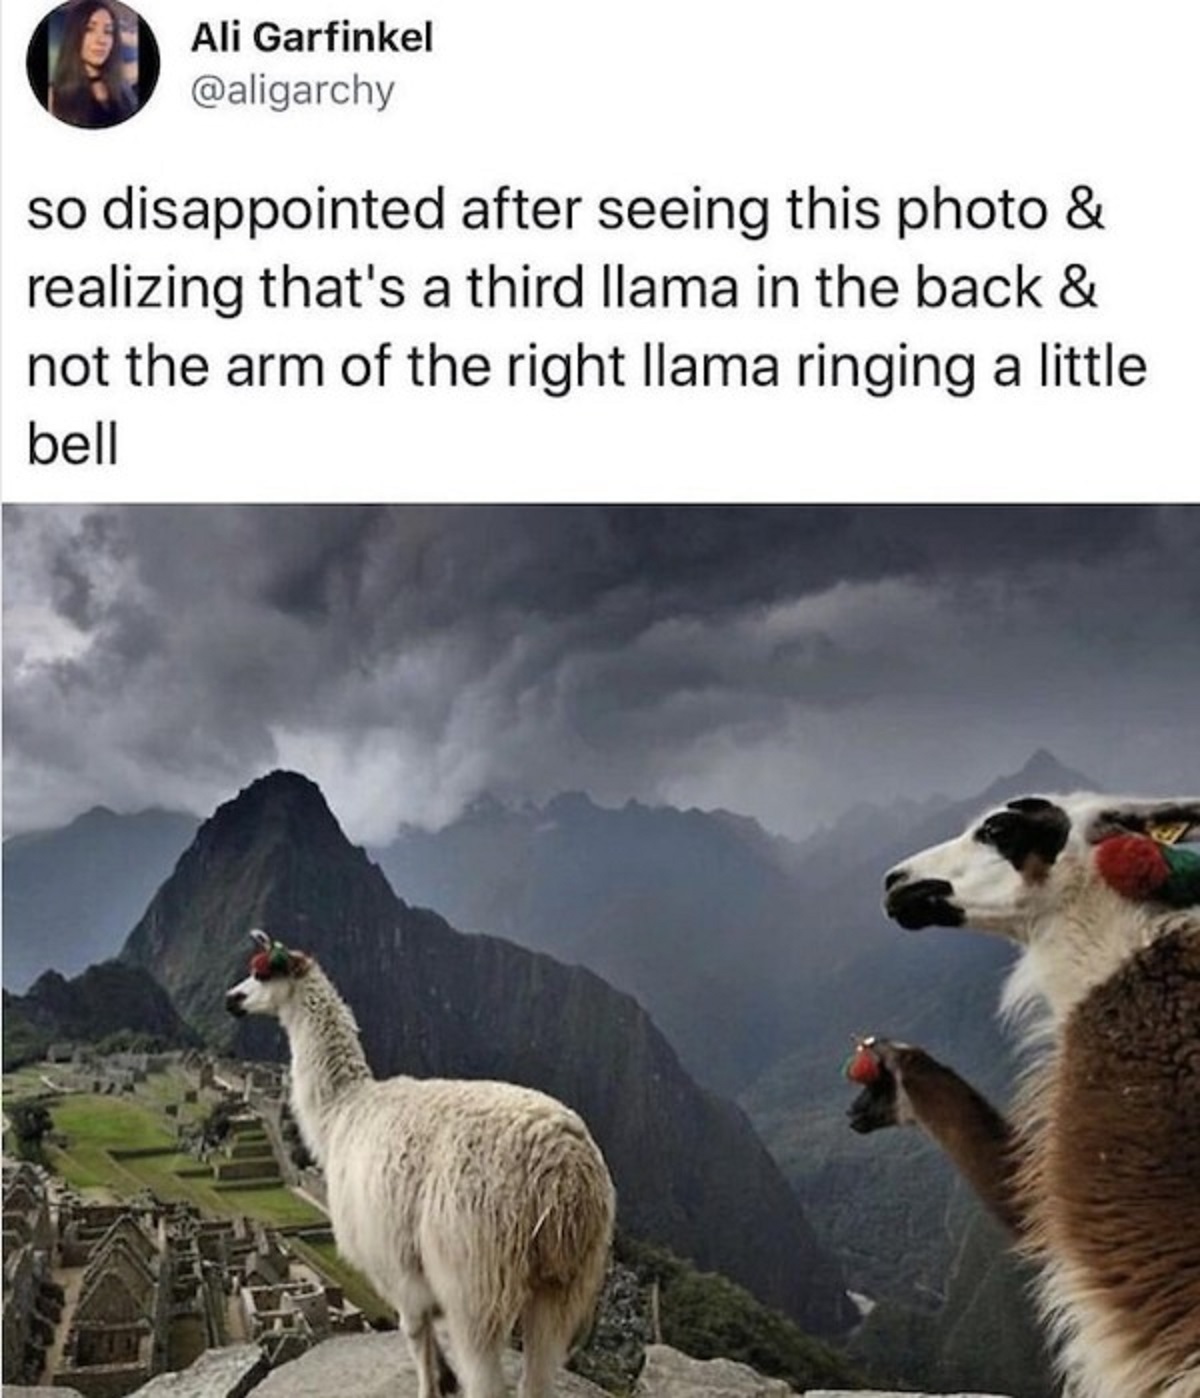 llama ringing a little bell - Ali Garfinkel so disappointed after seeing this photo & realizing that's a third llama in the back & not the arm of the right llama ringing a little bell